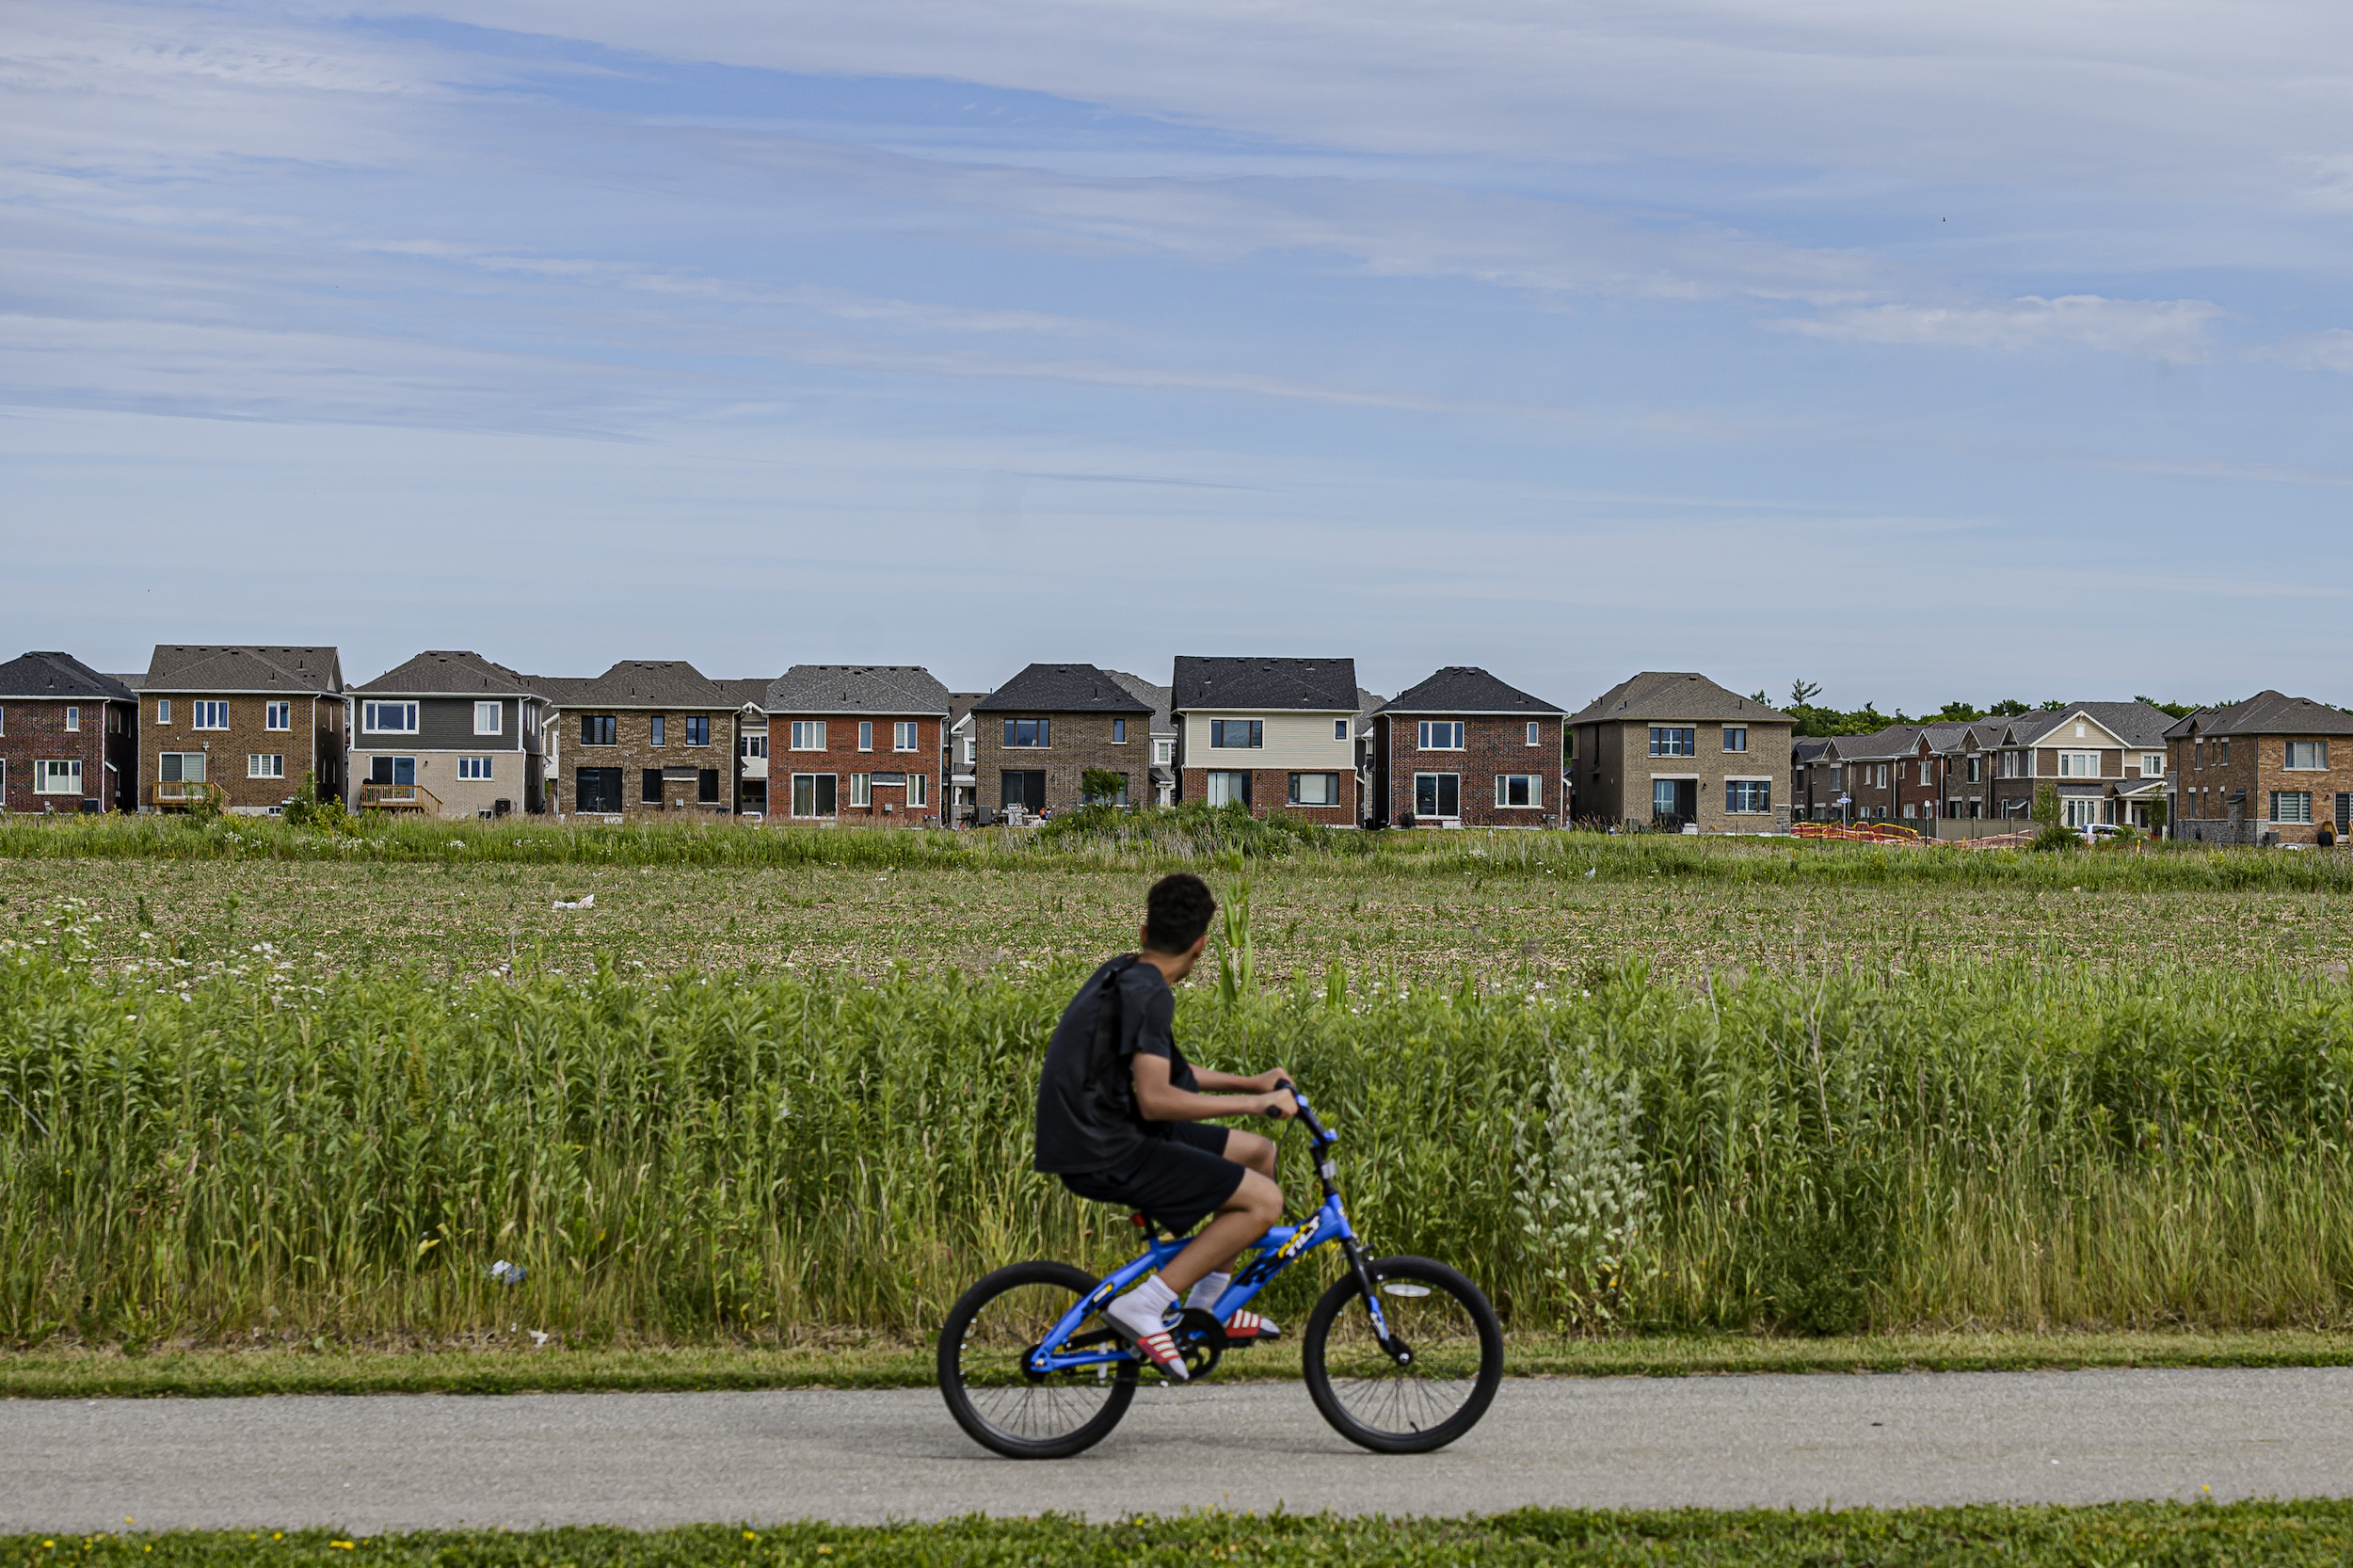 Townhouses in Milton, Ont., on Sunday, June 19, 2022.